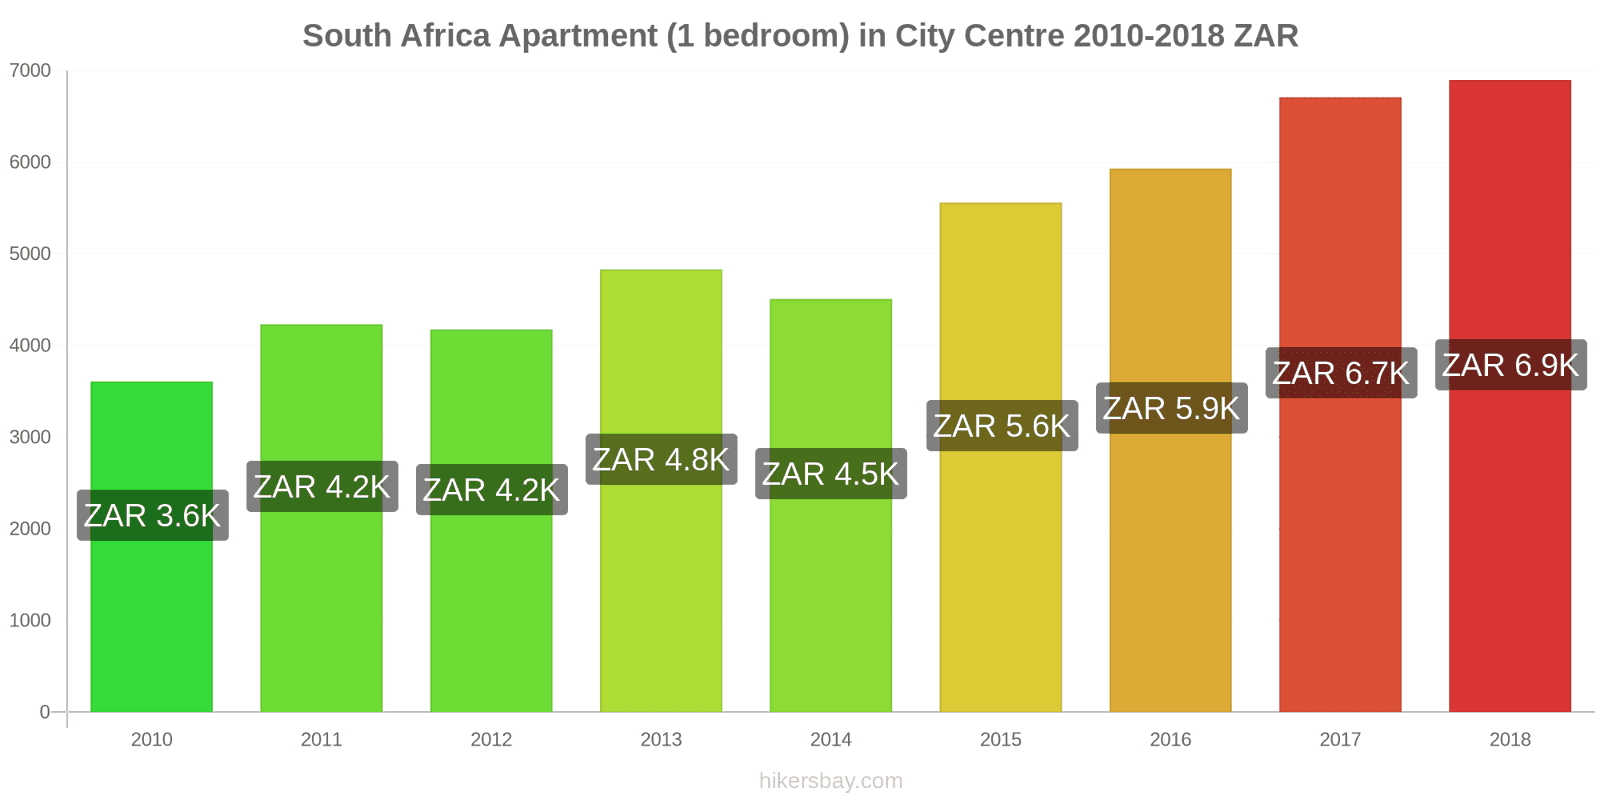 South Africa price changes Apartment (1 bedroom) in city centre hikersbay.com